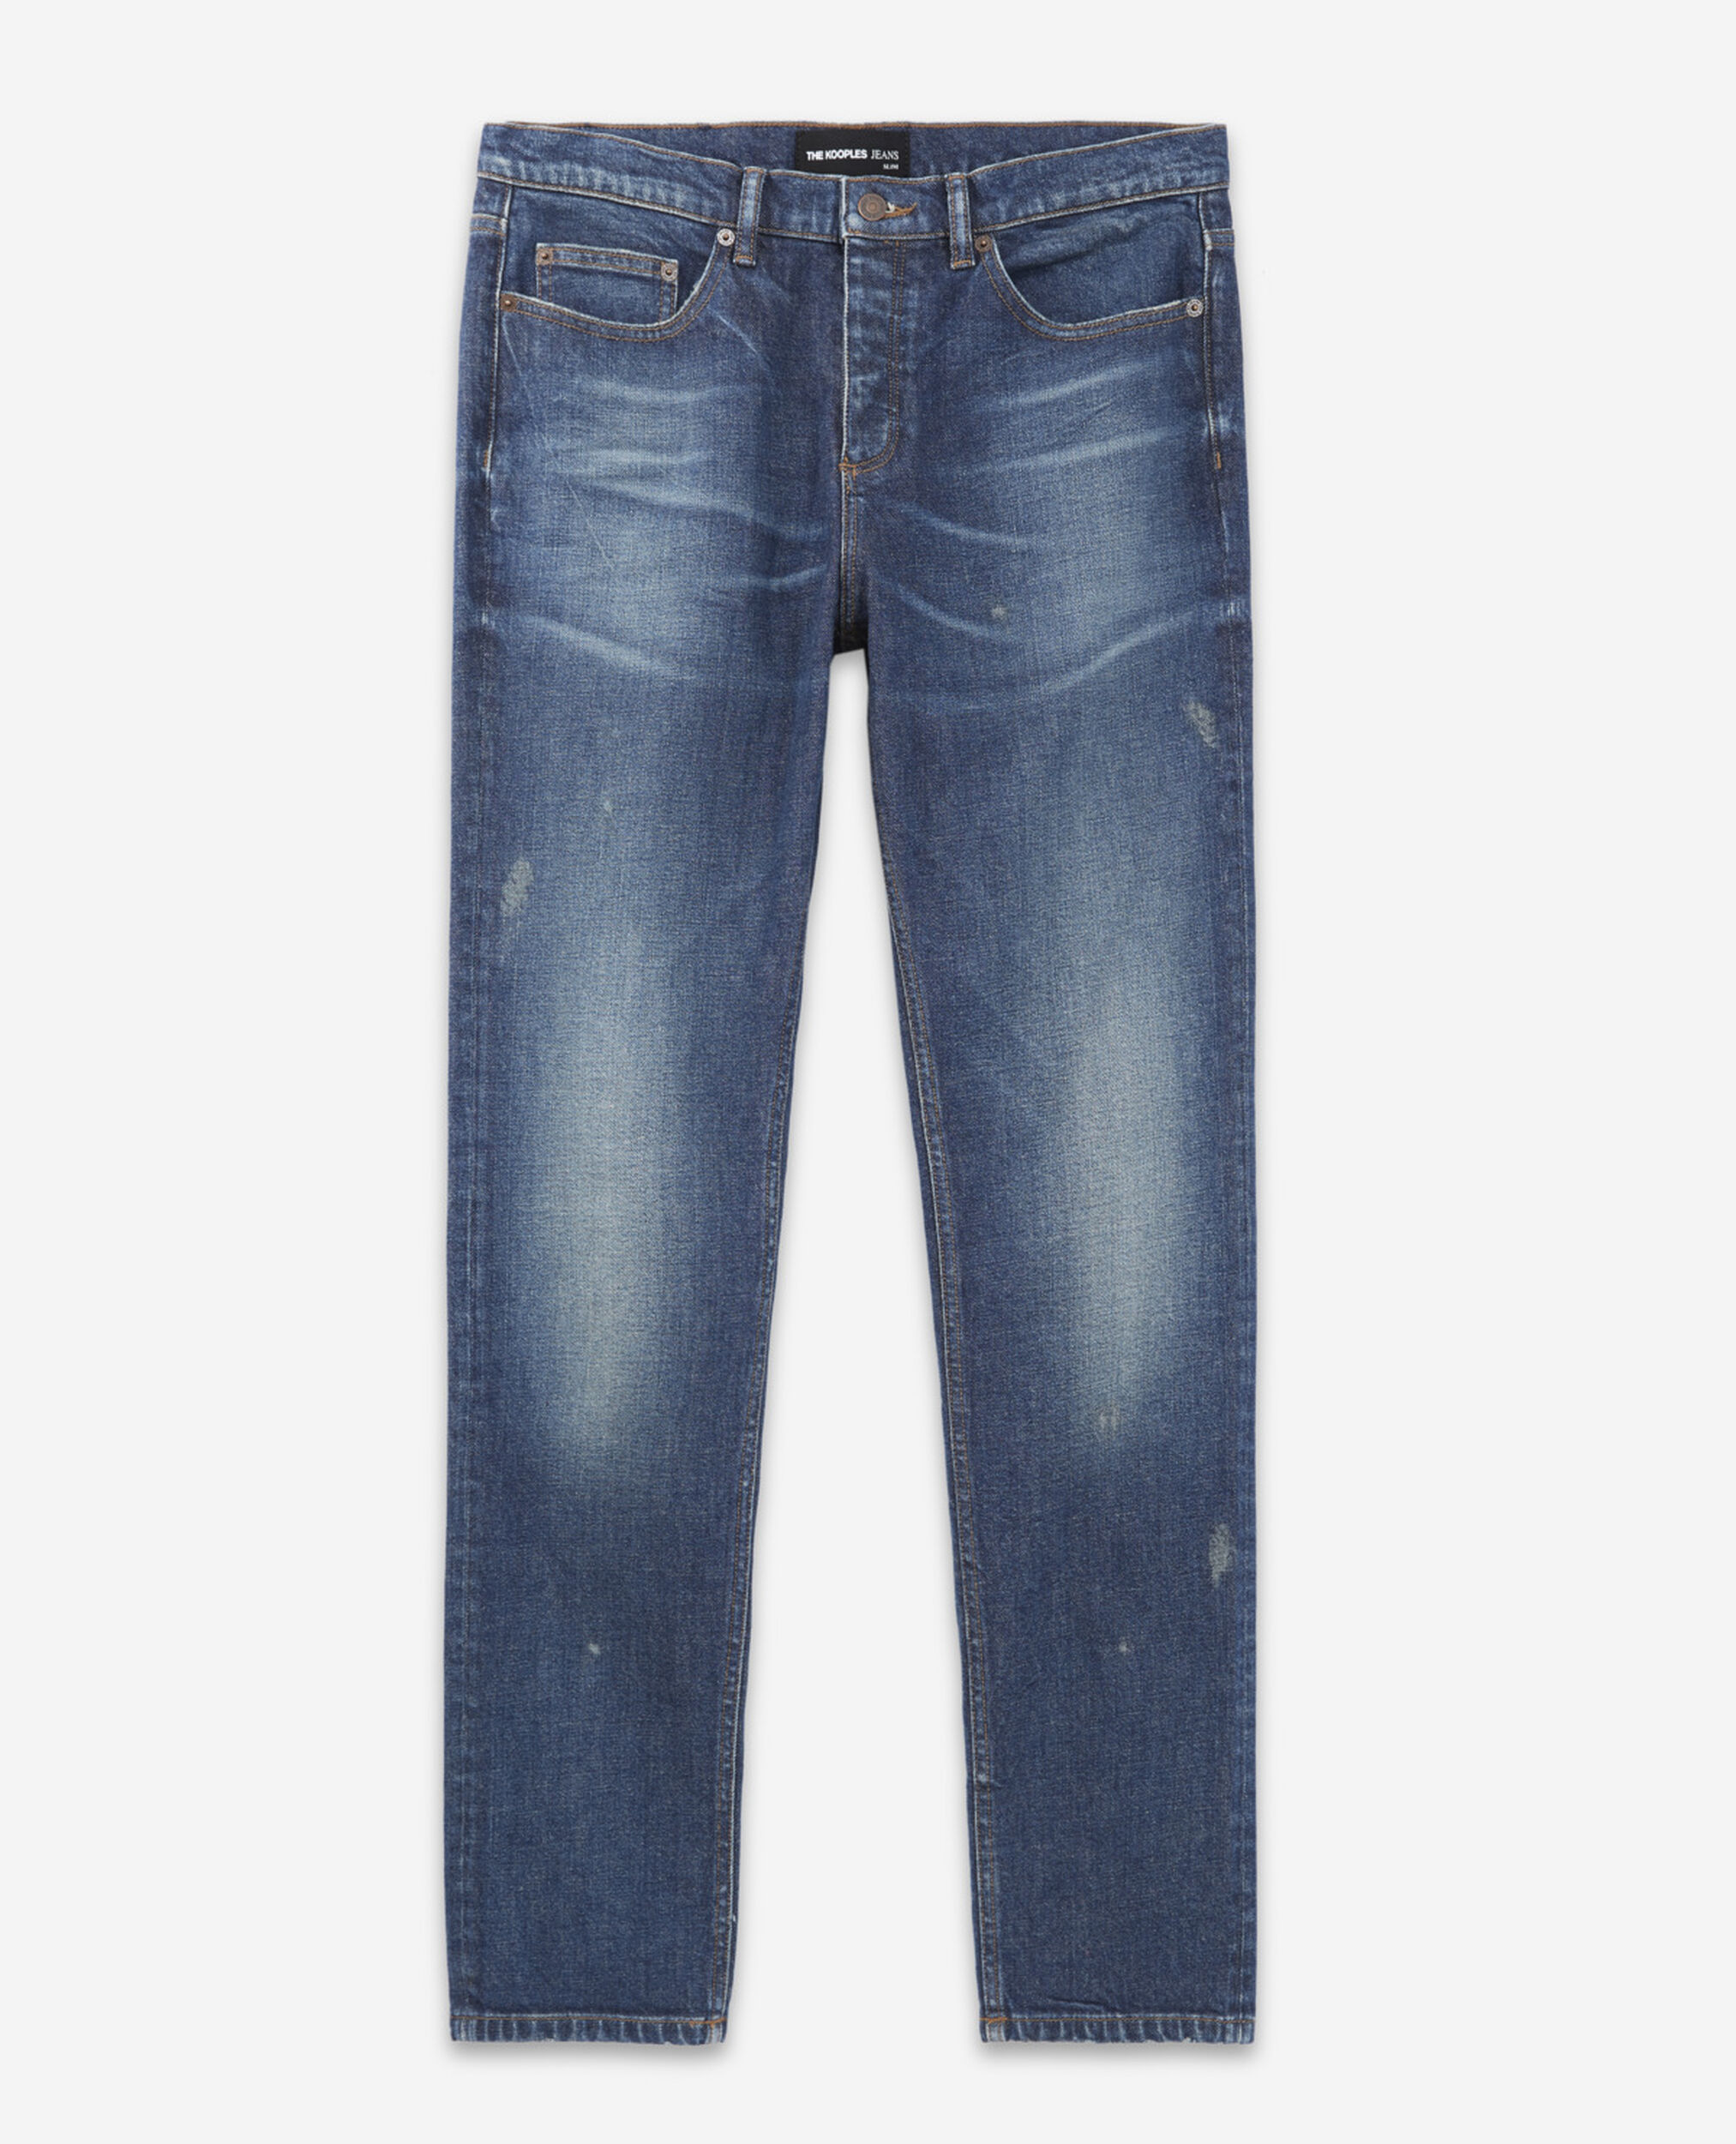 Blue slim-fit faded jeans with five | The Kooples - US